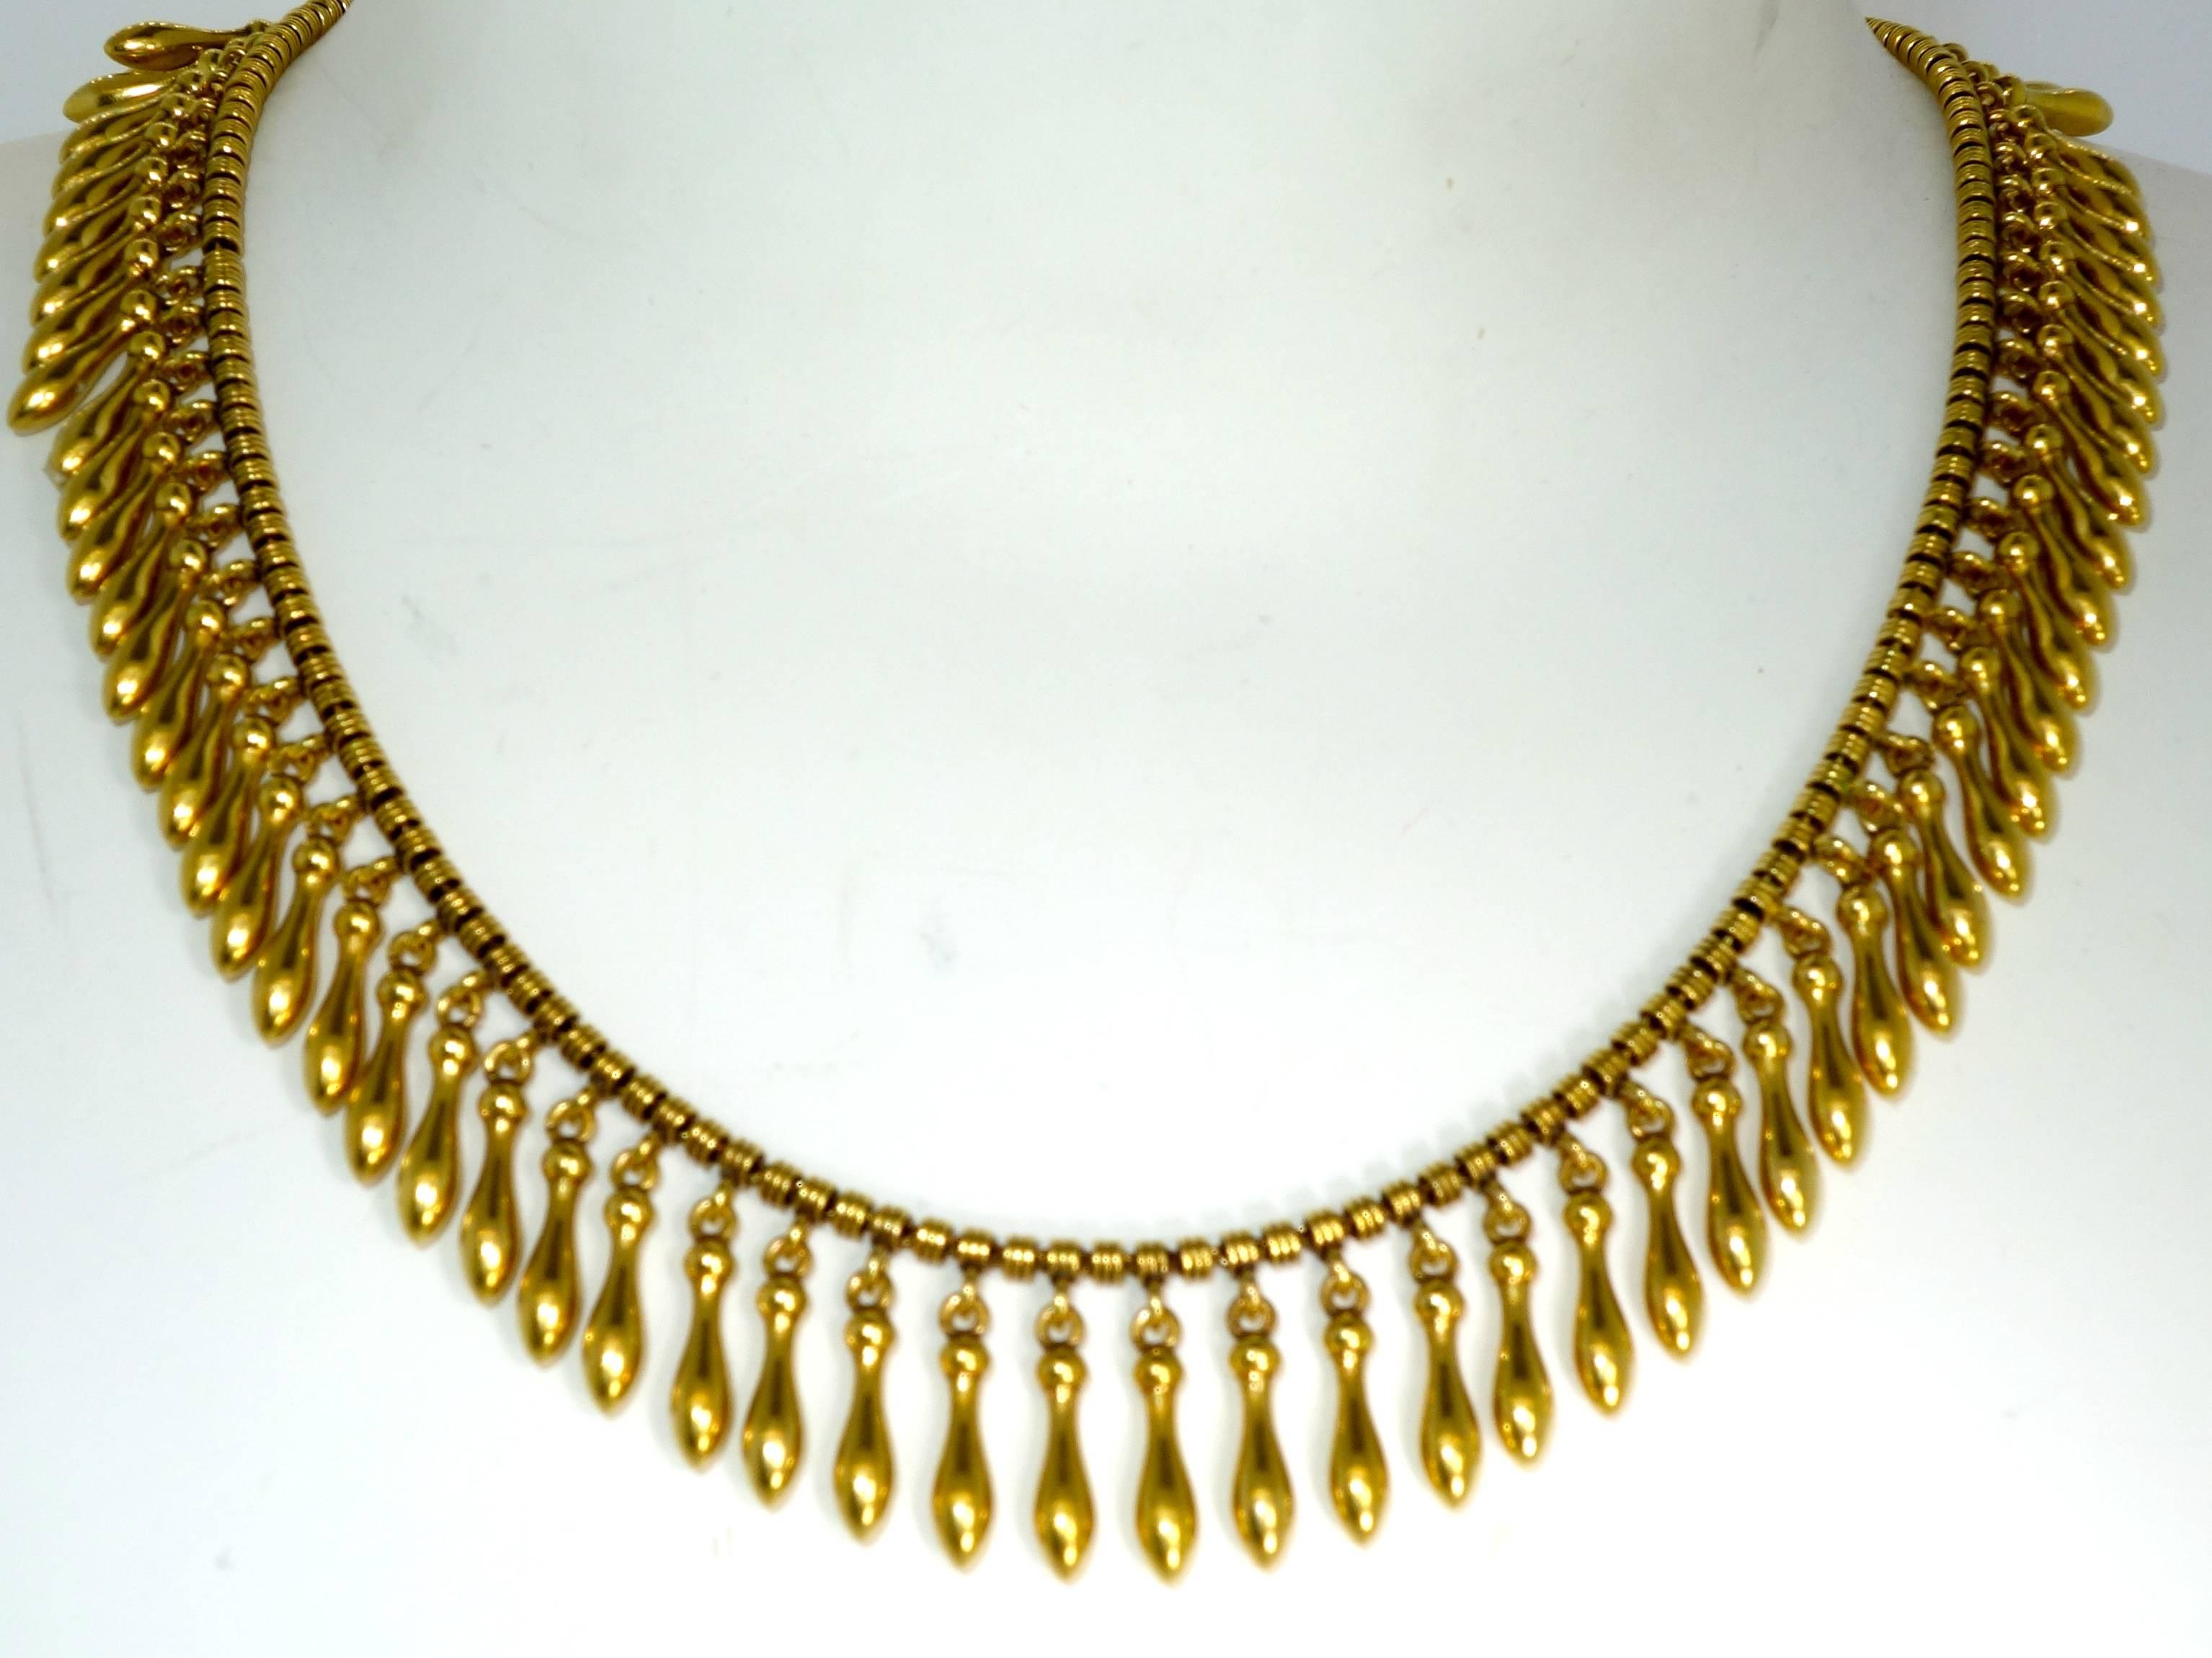 Victorian 19th Century Gold Fringe Necklace